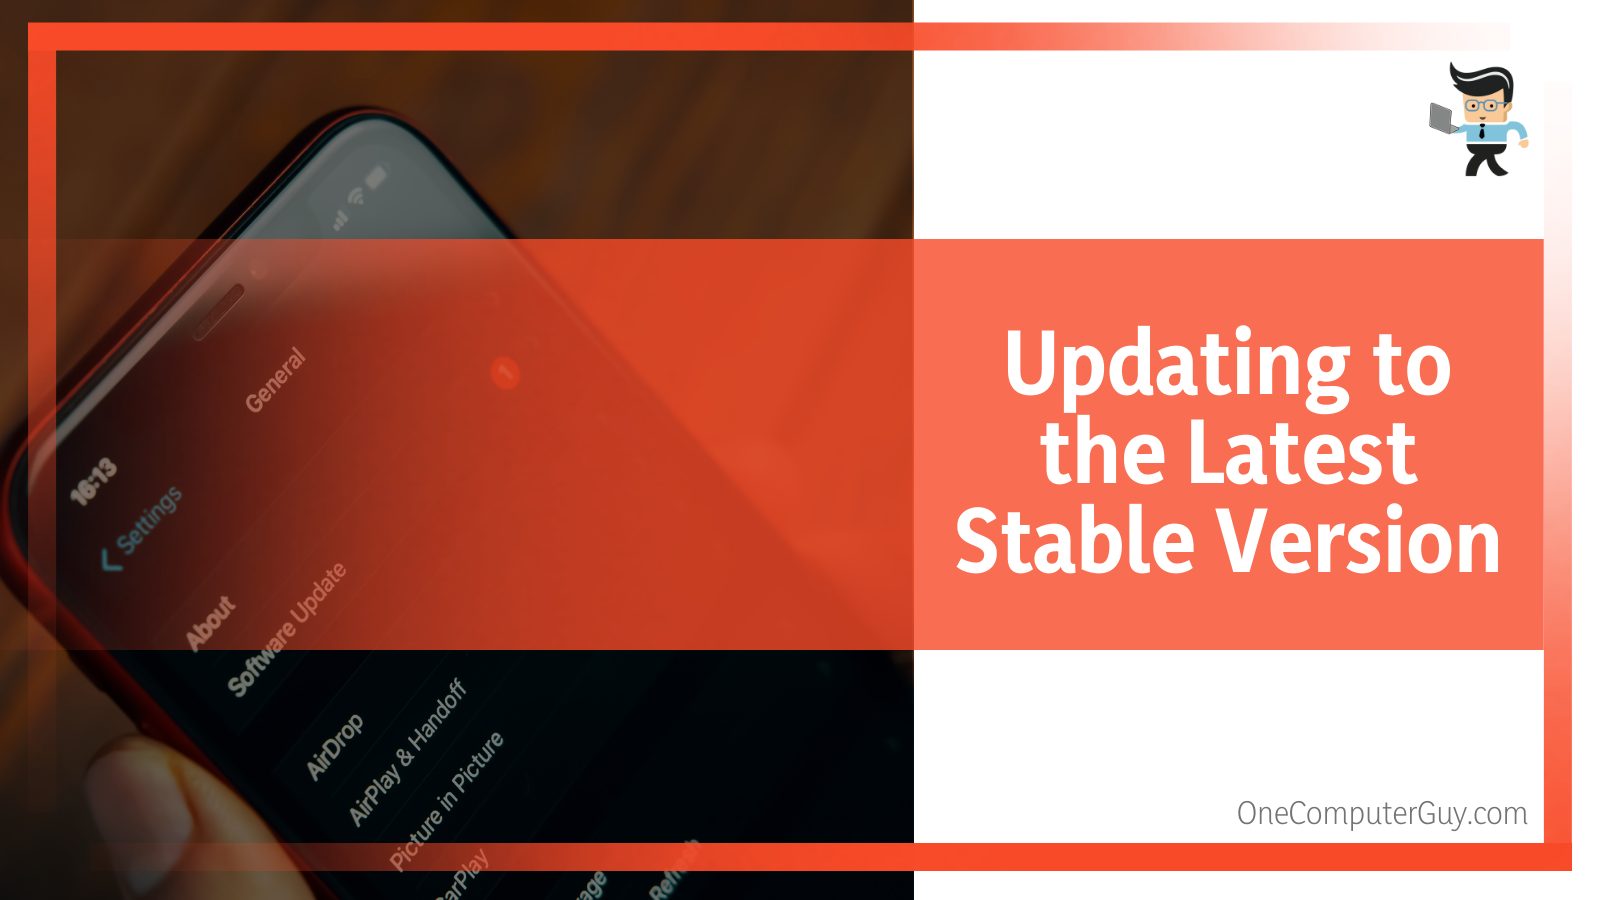 Updating to the Latest Stable Version